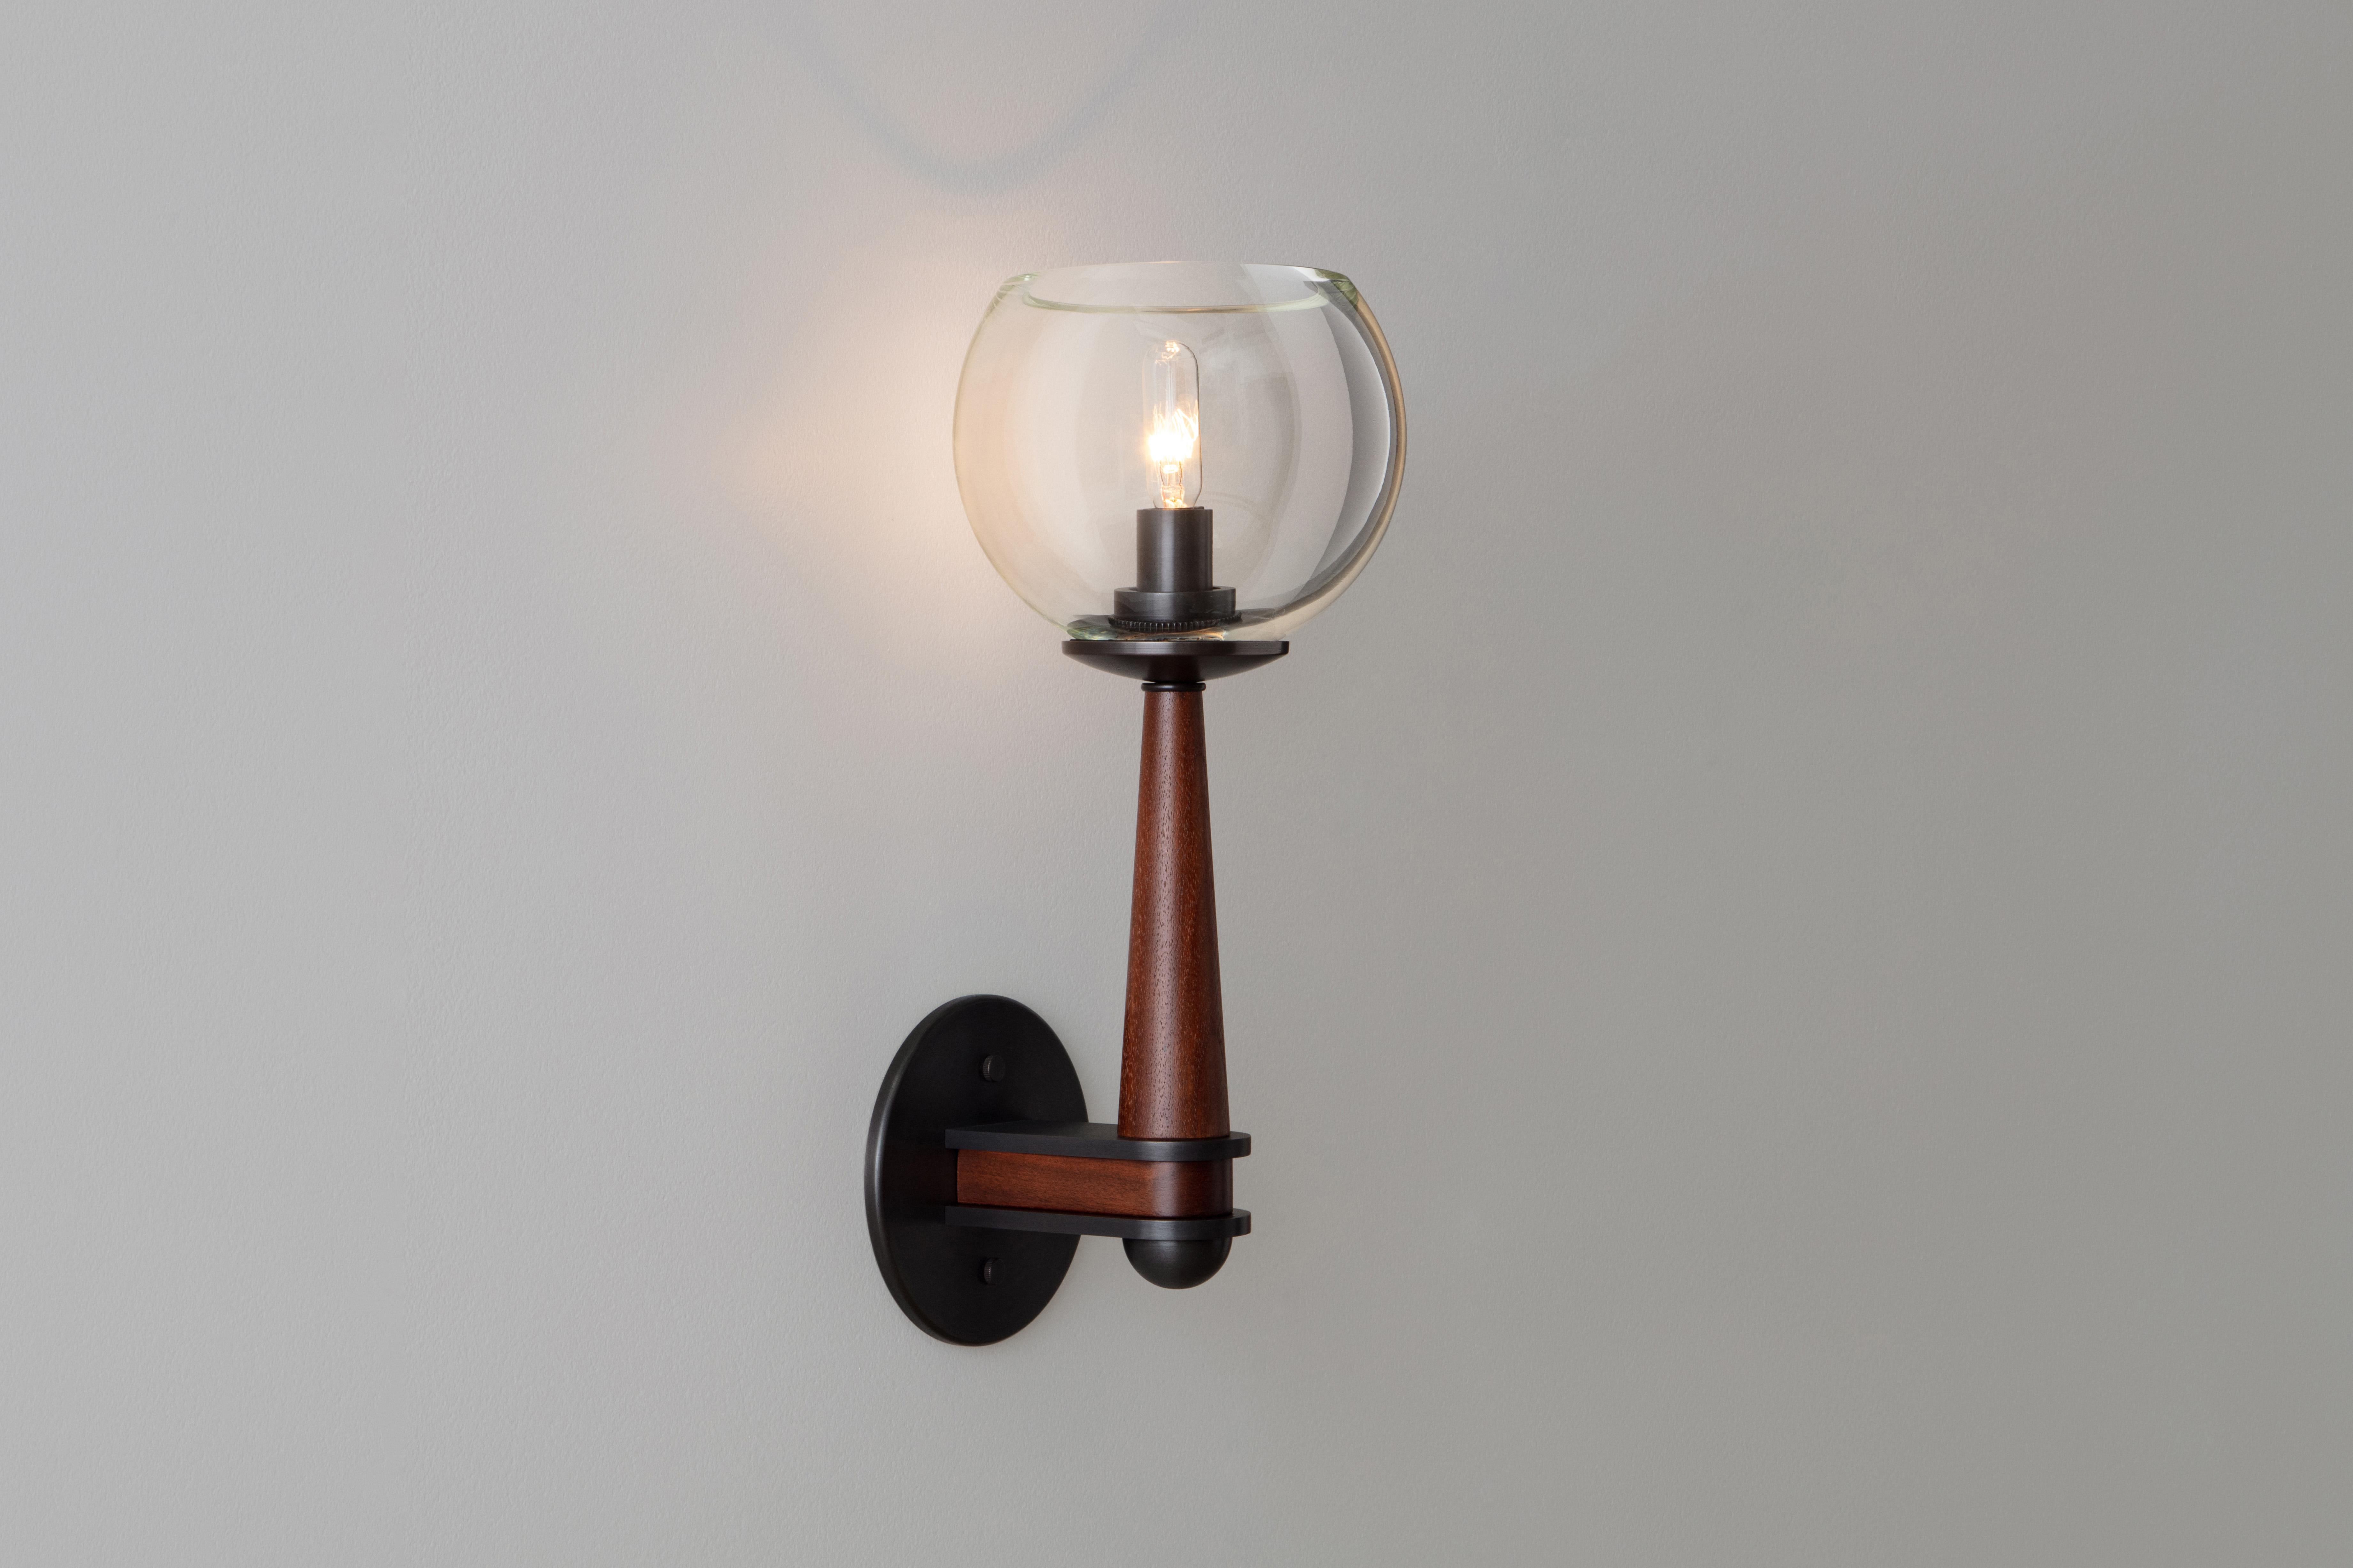 The Giotto Sconce unifies three luxe materials. A hand-blown globe rests upon a tapered wooden body. Precisely machined brass elements add ornament and strength. Wood, glass and brass finishes can be customized to coordinate with many architectural